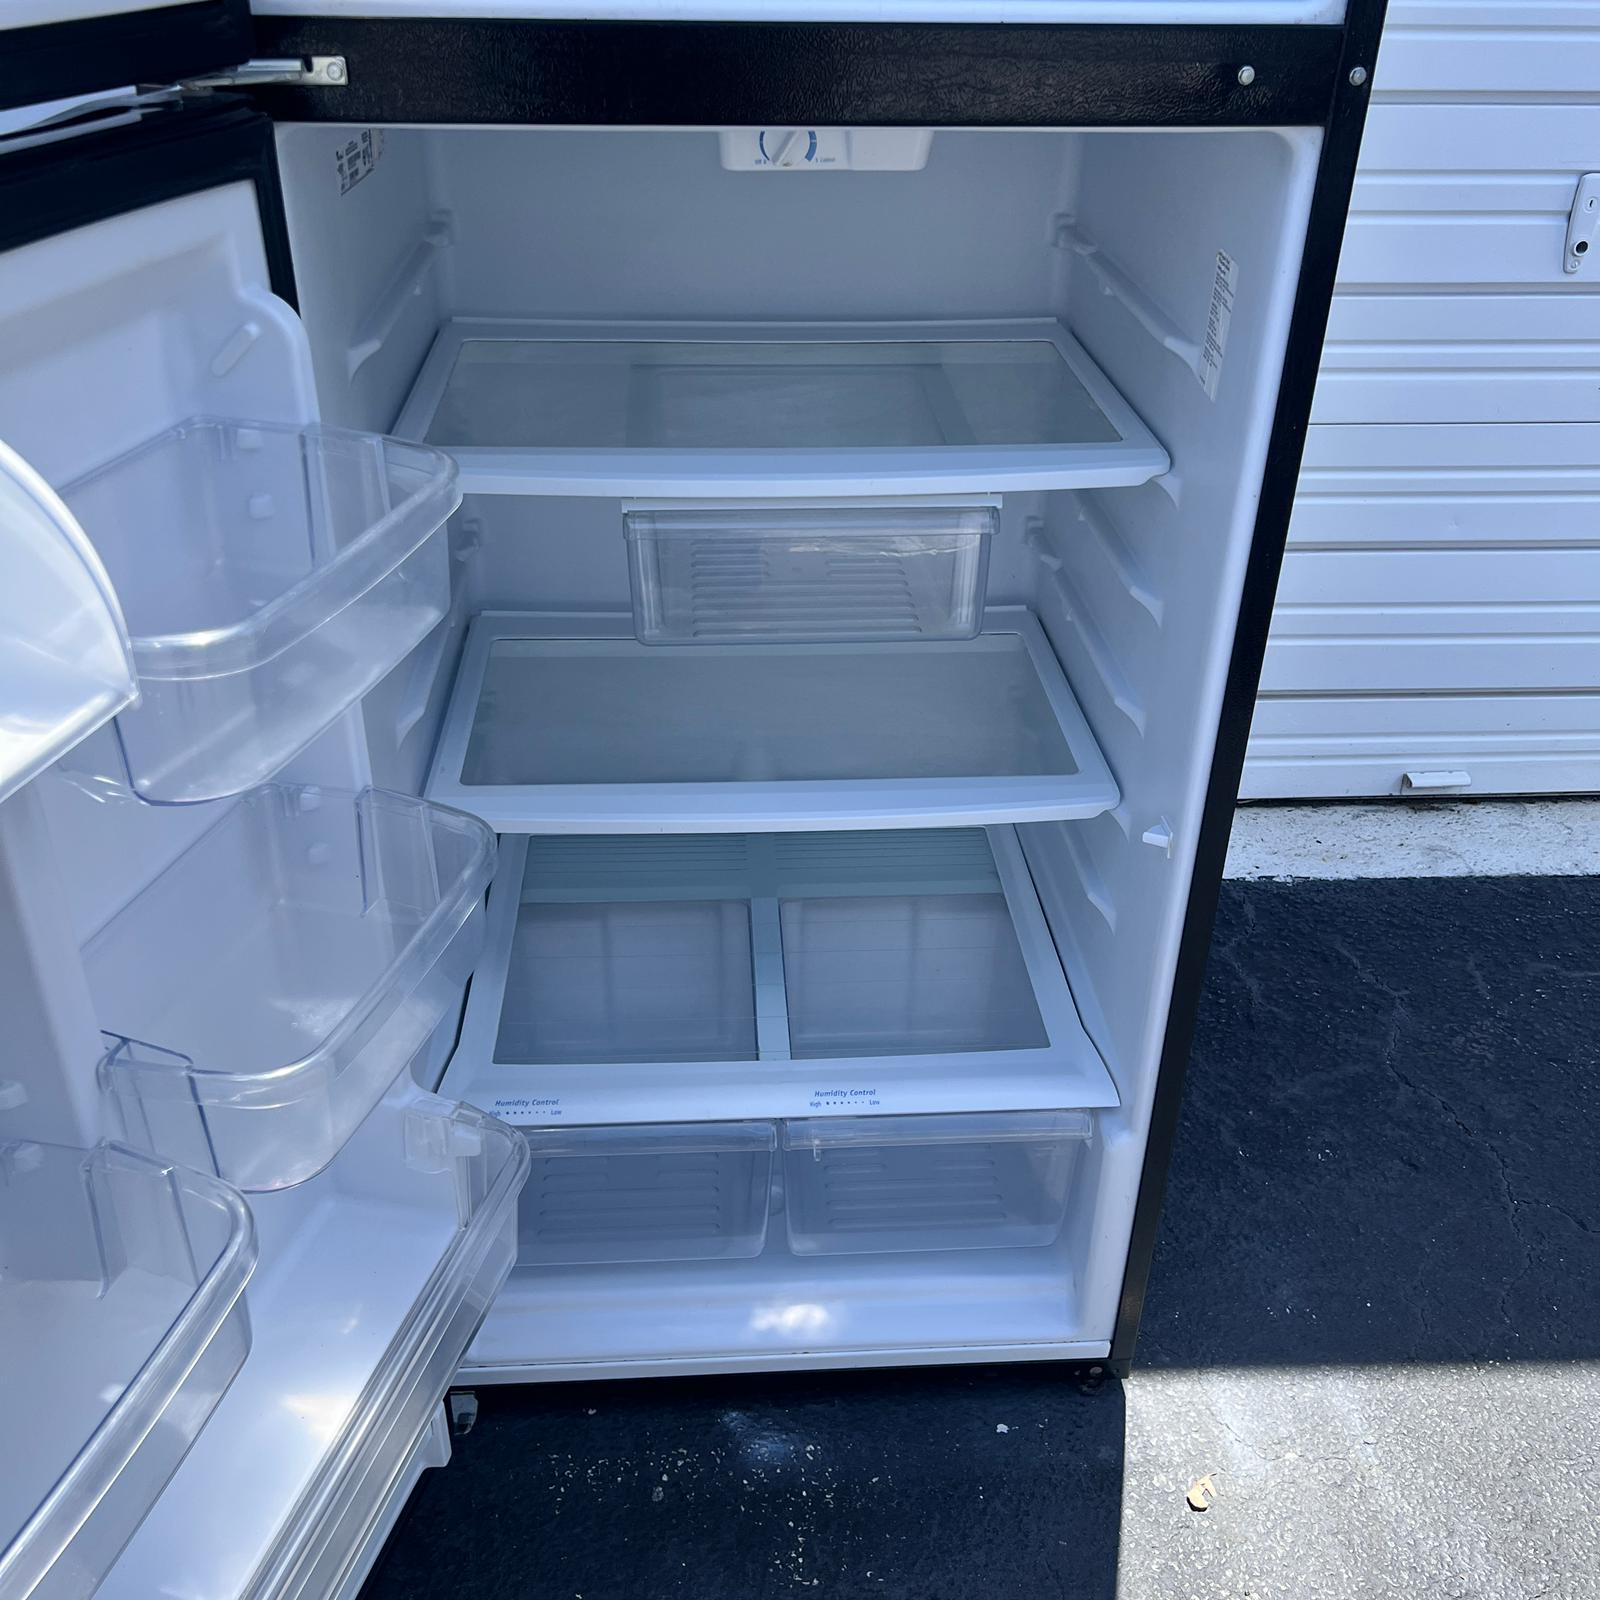 Whirlpool Stainless Steel Top and Bottom Refrigerator with Ice maker